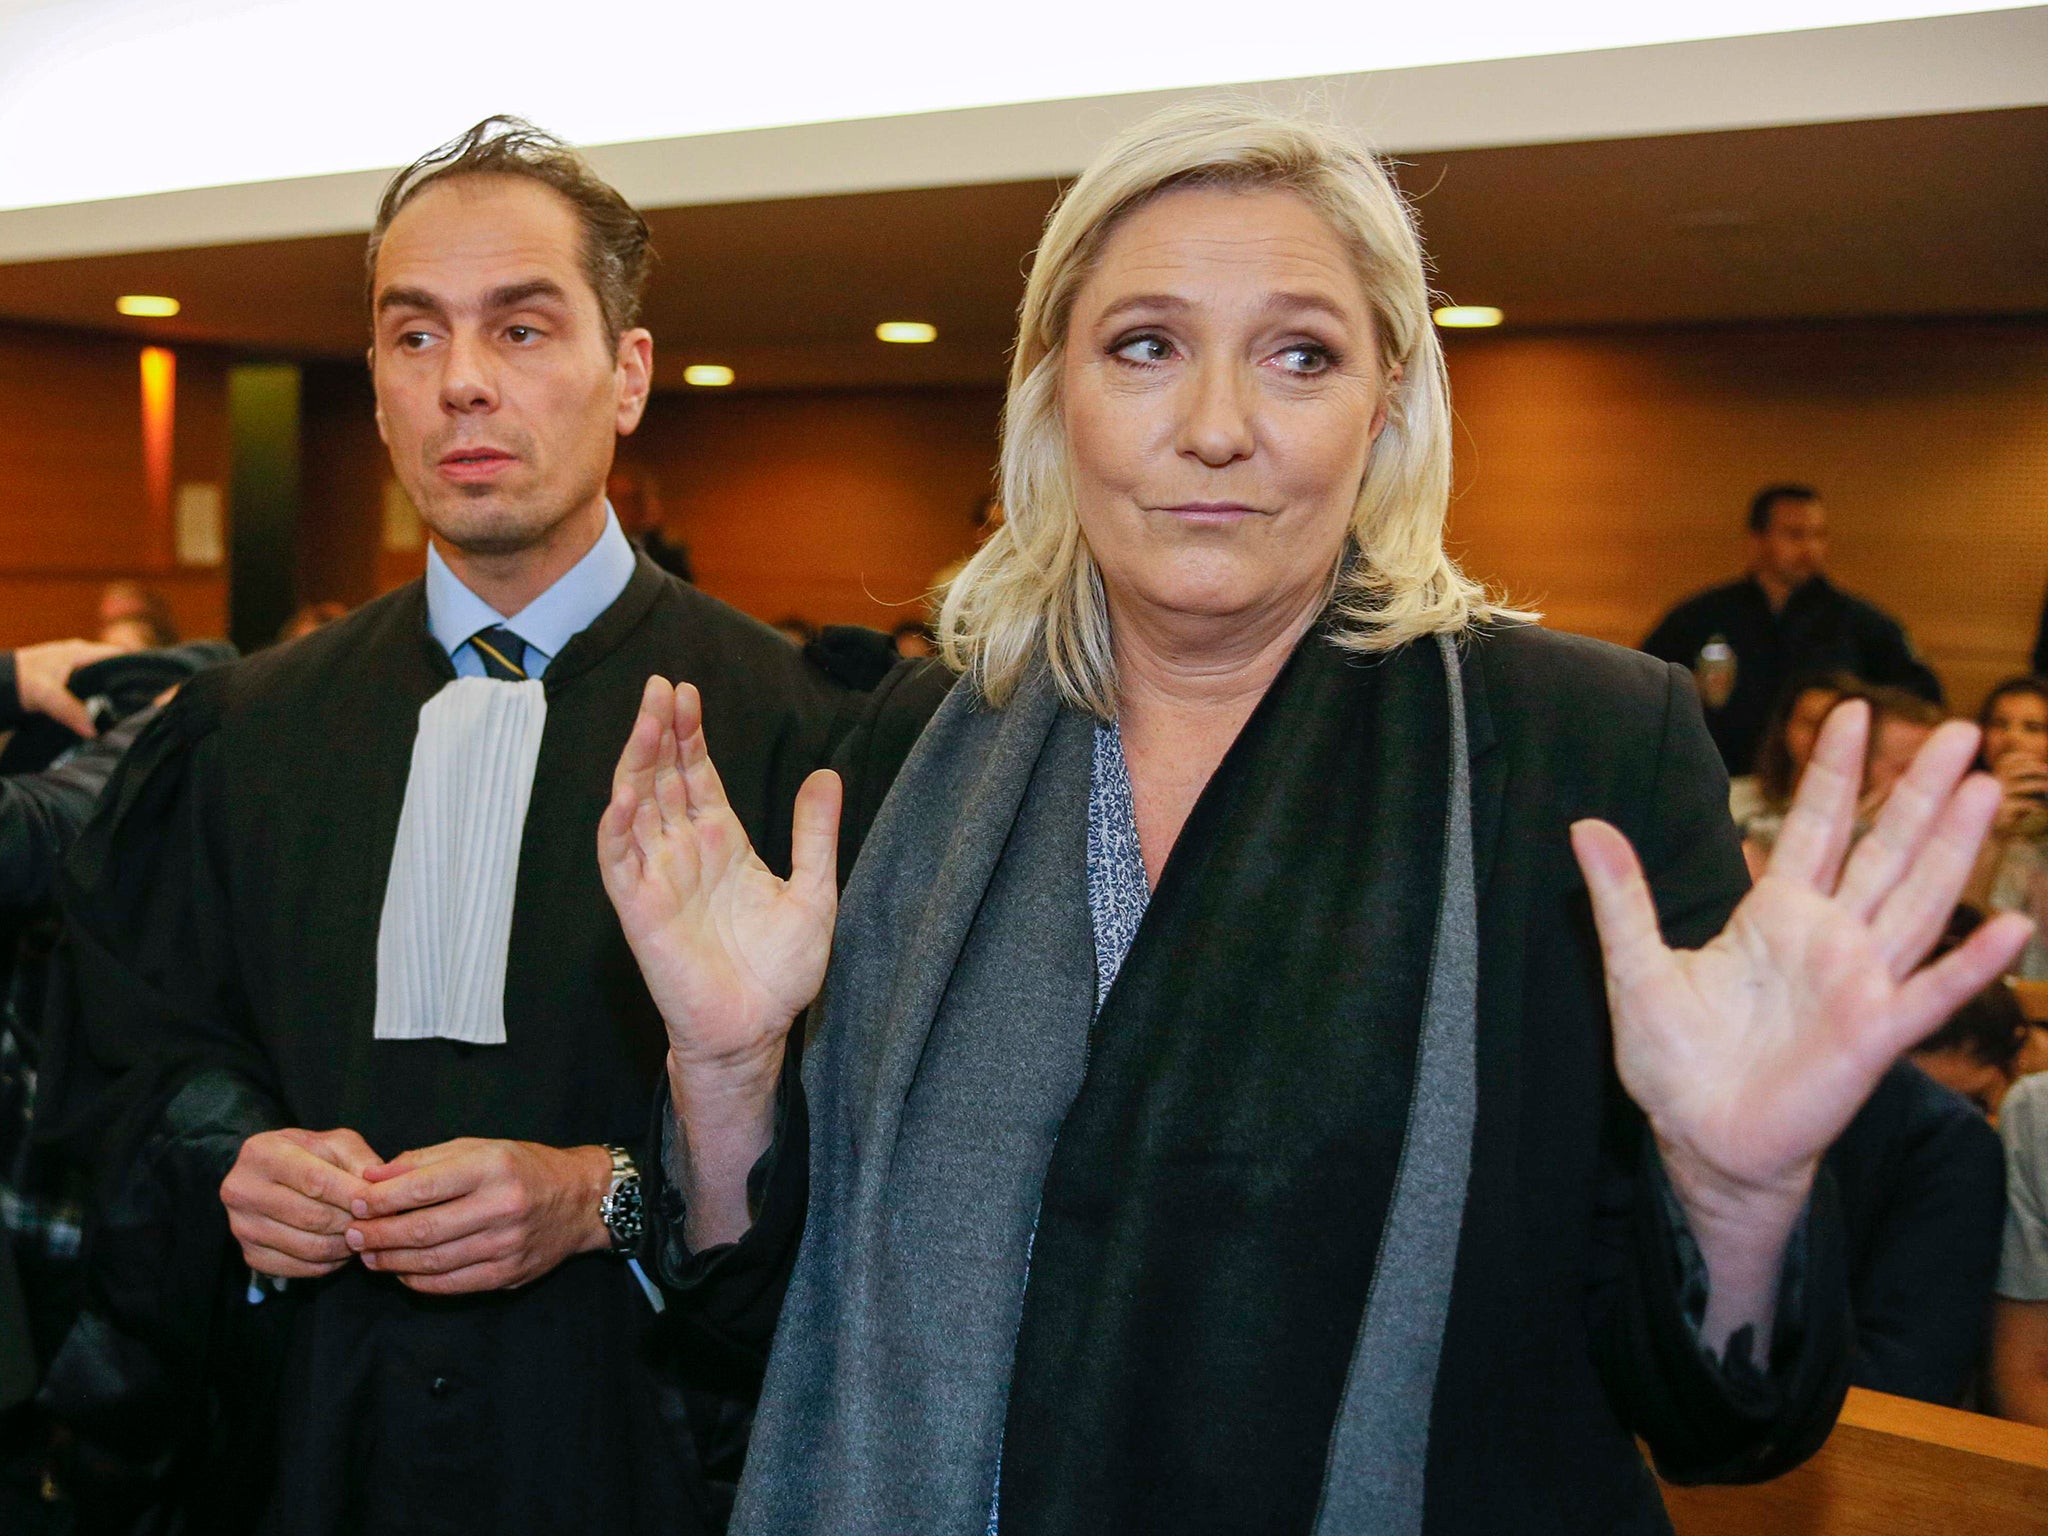 File image: Marine Le Pen of the Front National